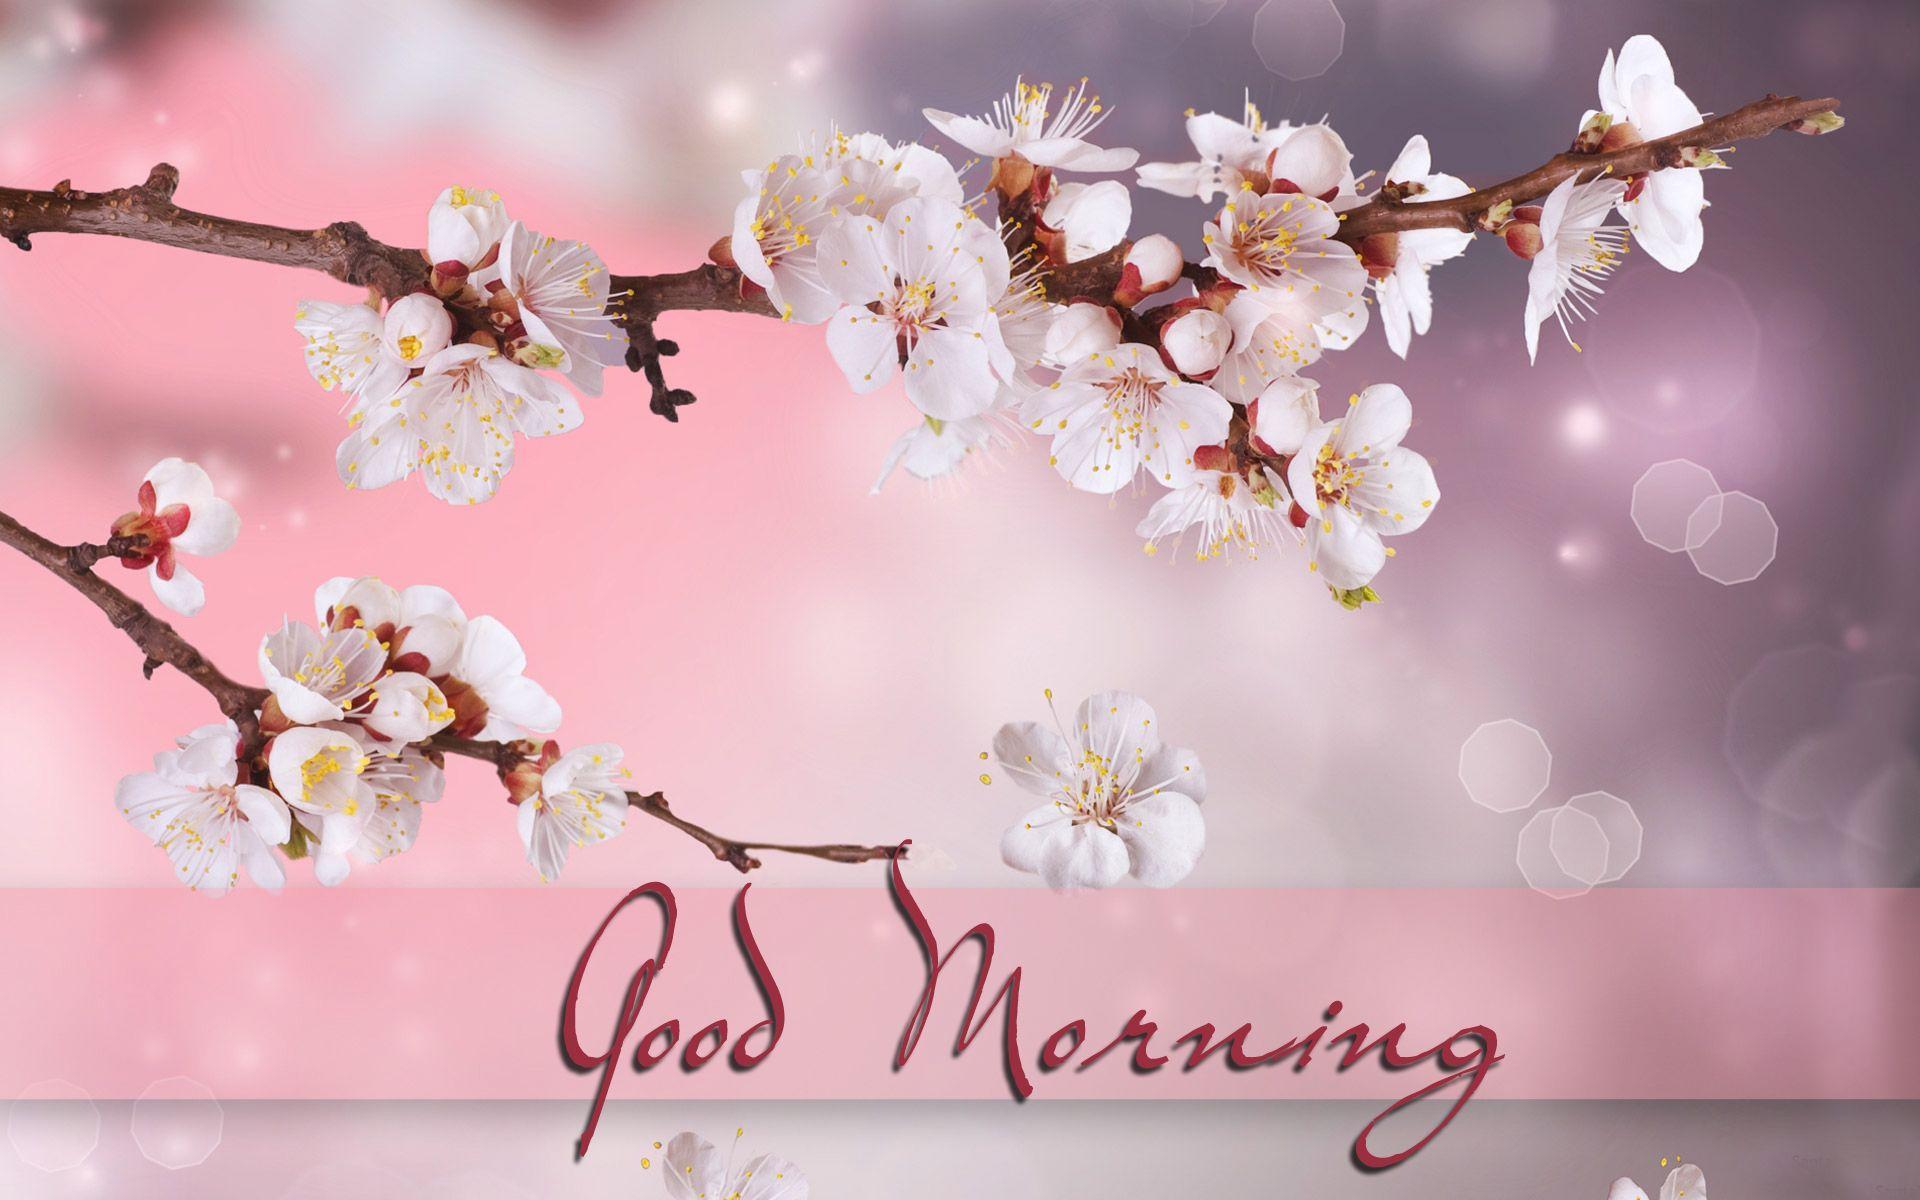 Good Morning wallpaper, Picture, Image